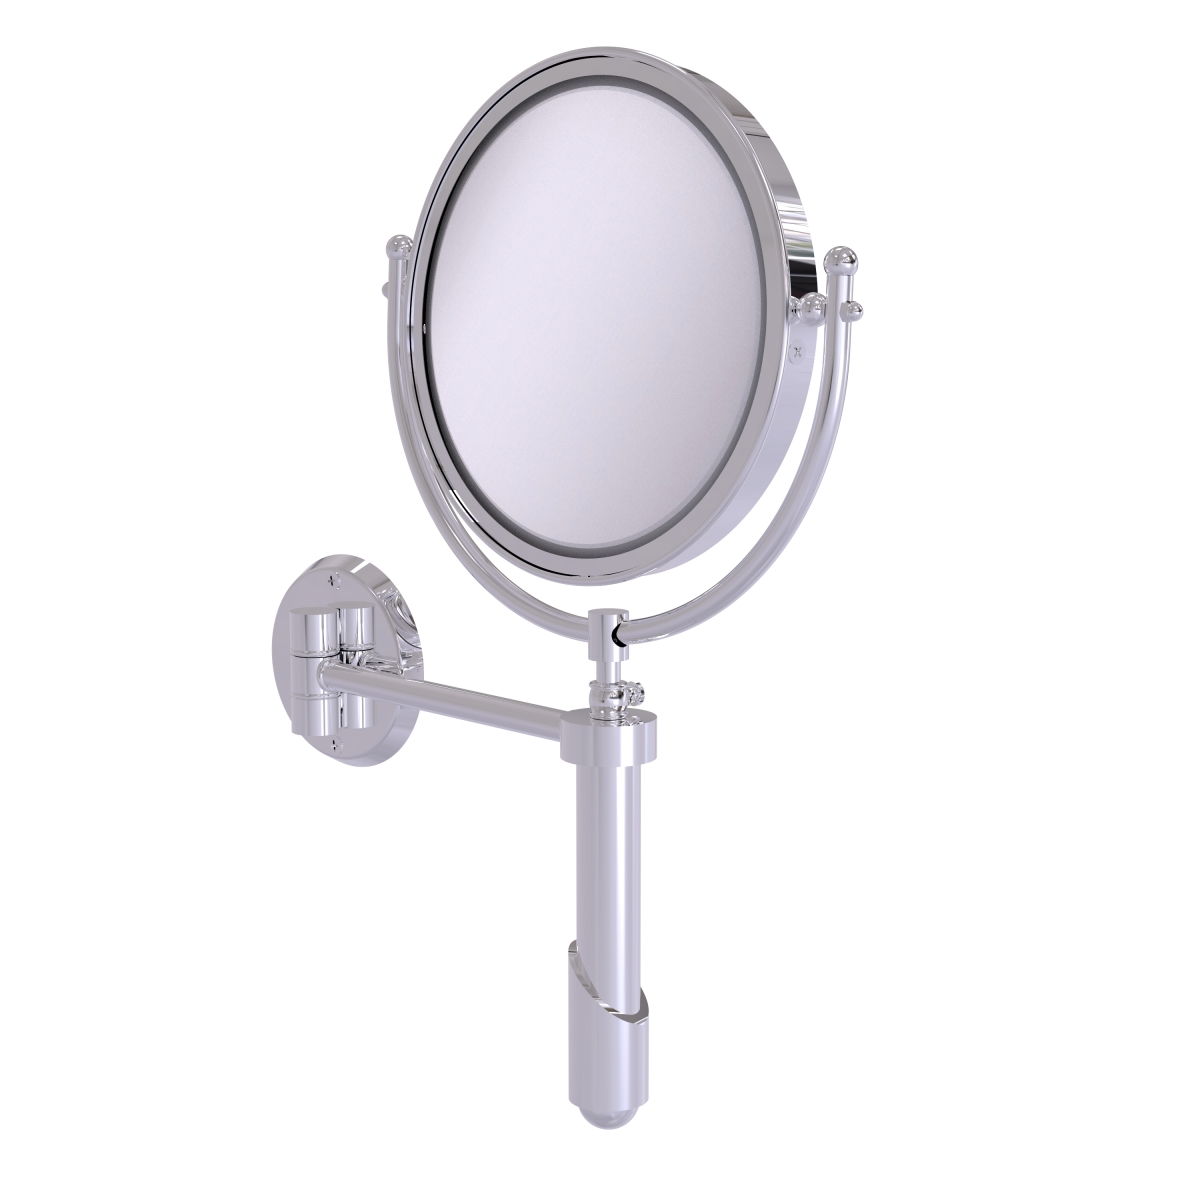 SHM-8-2X-PC 8 in. dia. Soho Collection Wall Mounted Make-Up Mirror with 2X Magnification, Polished Chrome -  Allied Brass, SHM-8/2X-PC